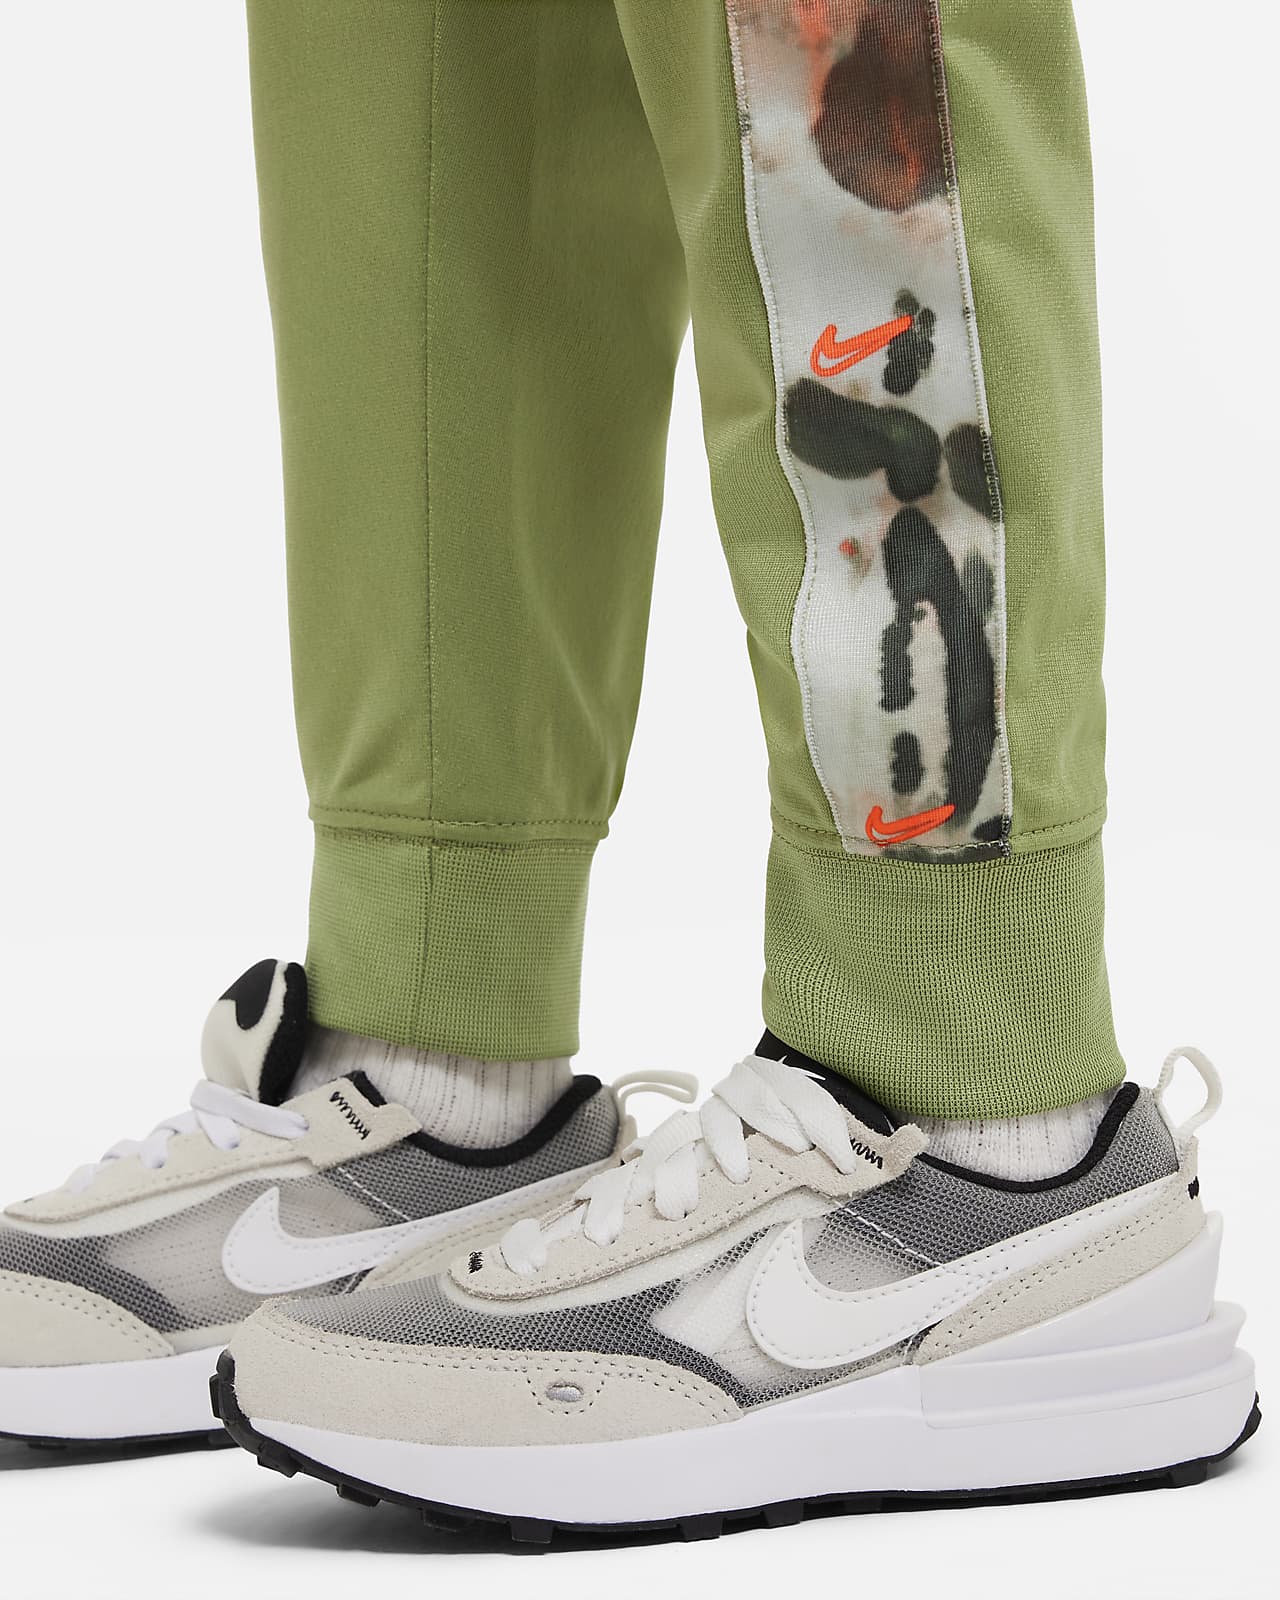 Nike is restocking its '90s-inspired Cactus Plant Flea Market apparel